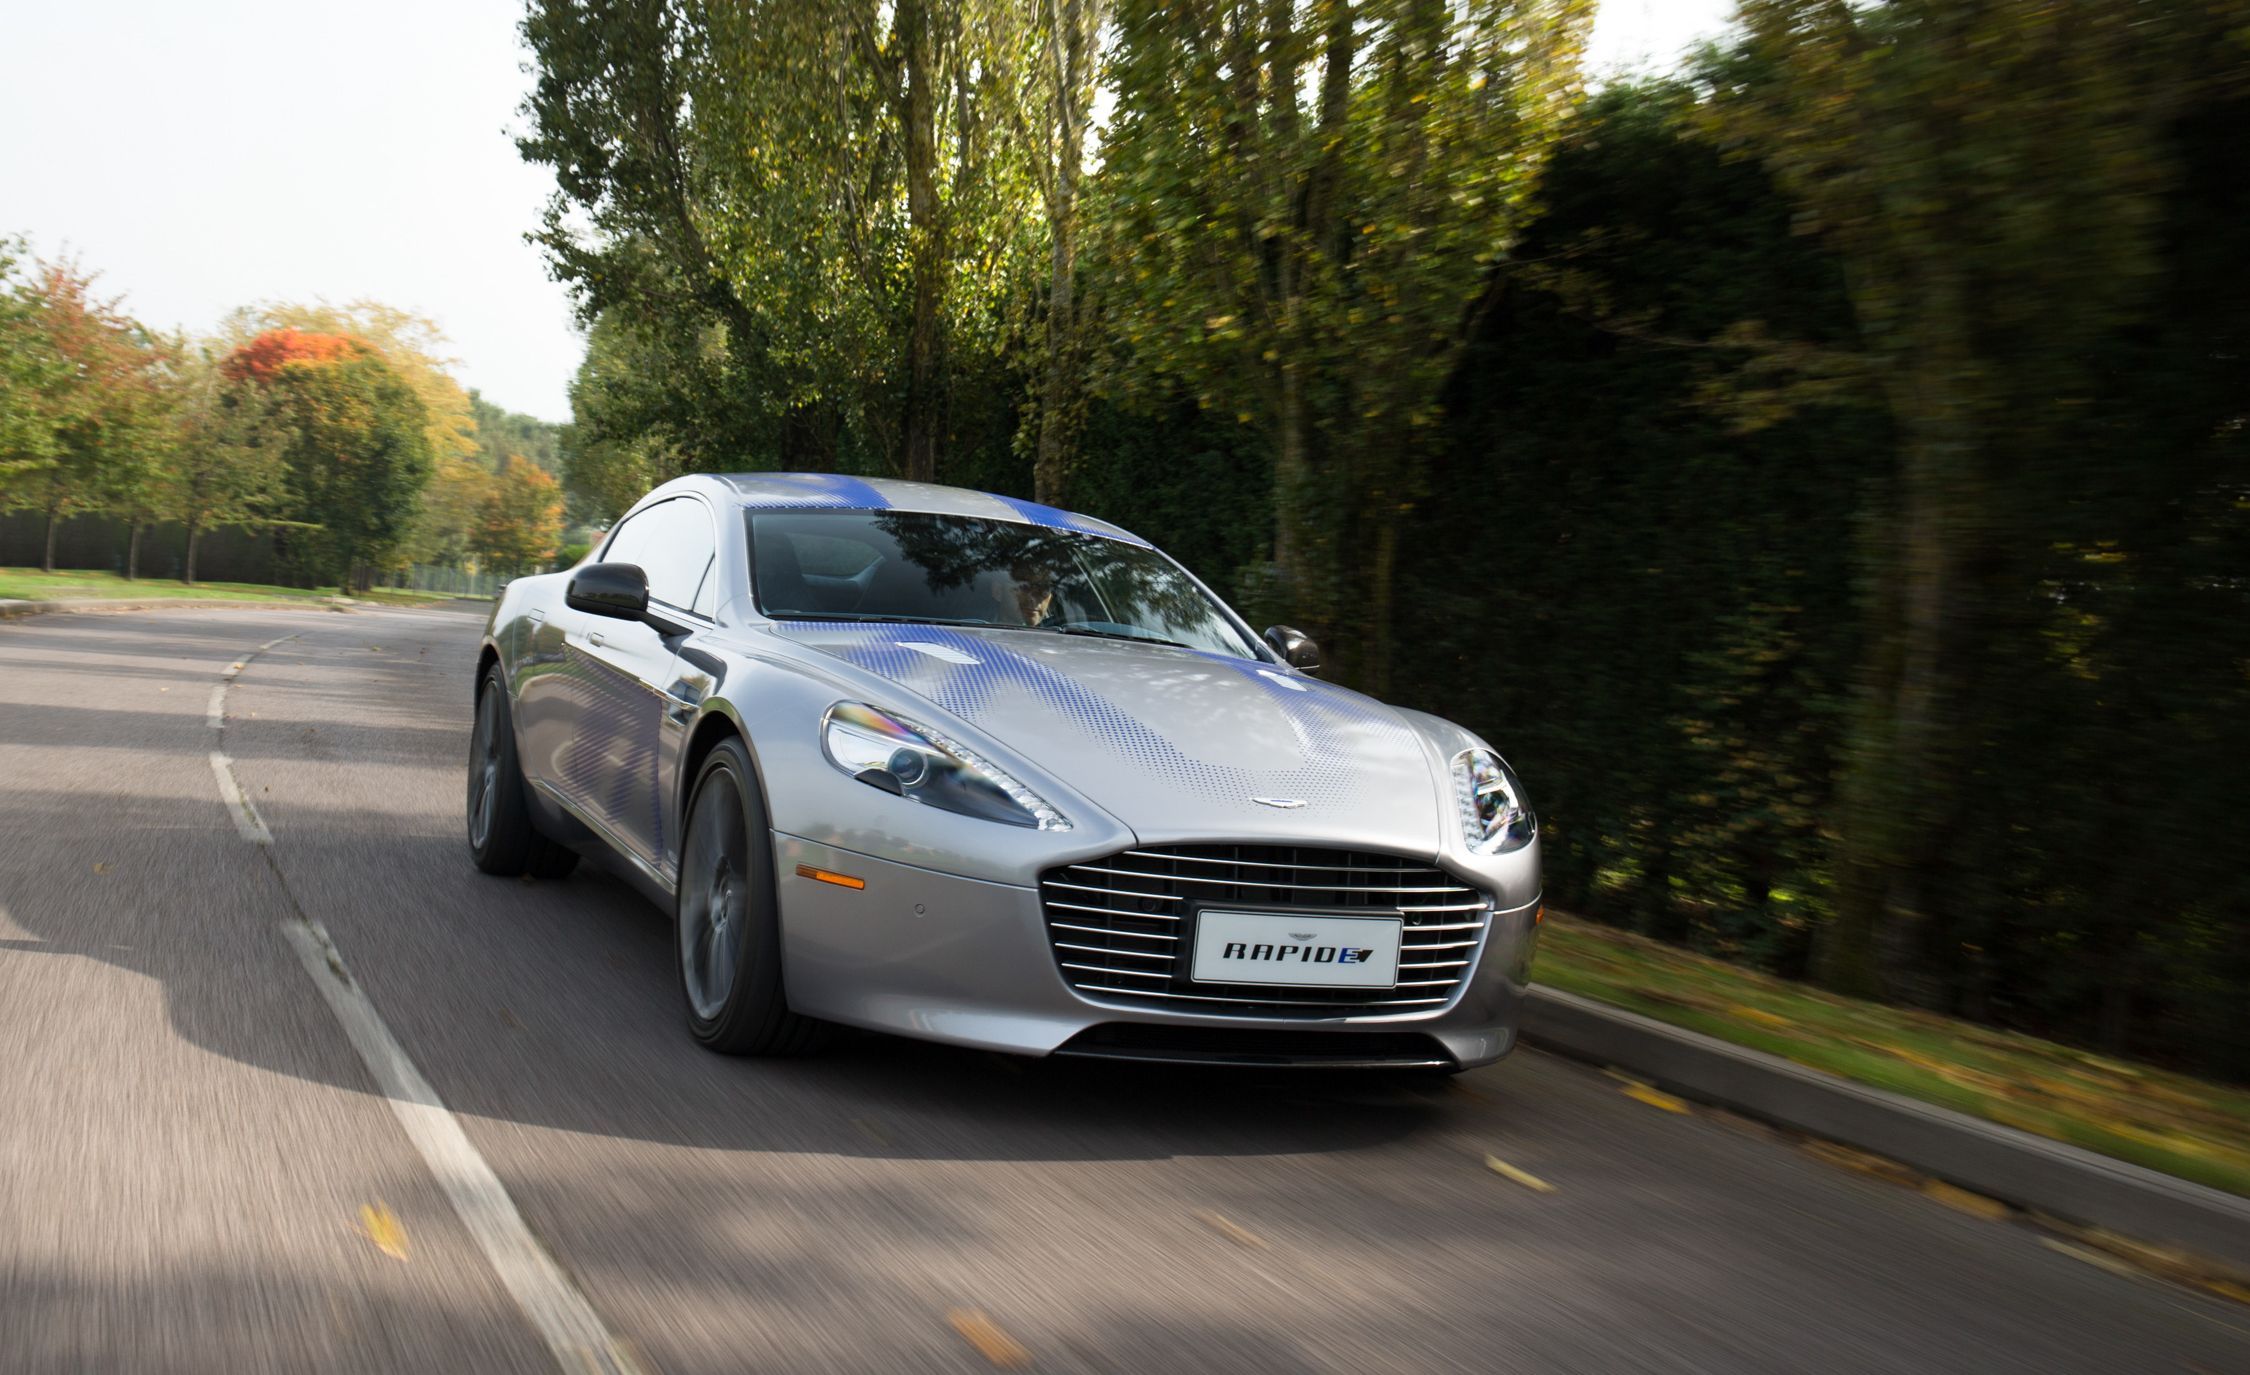 Aston Martin RapidE on the road